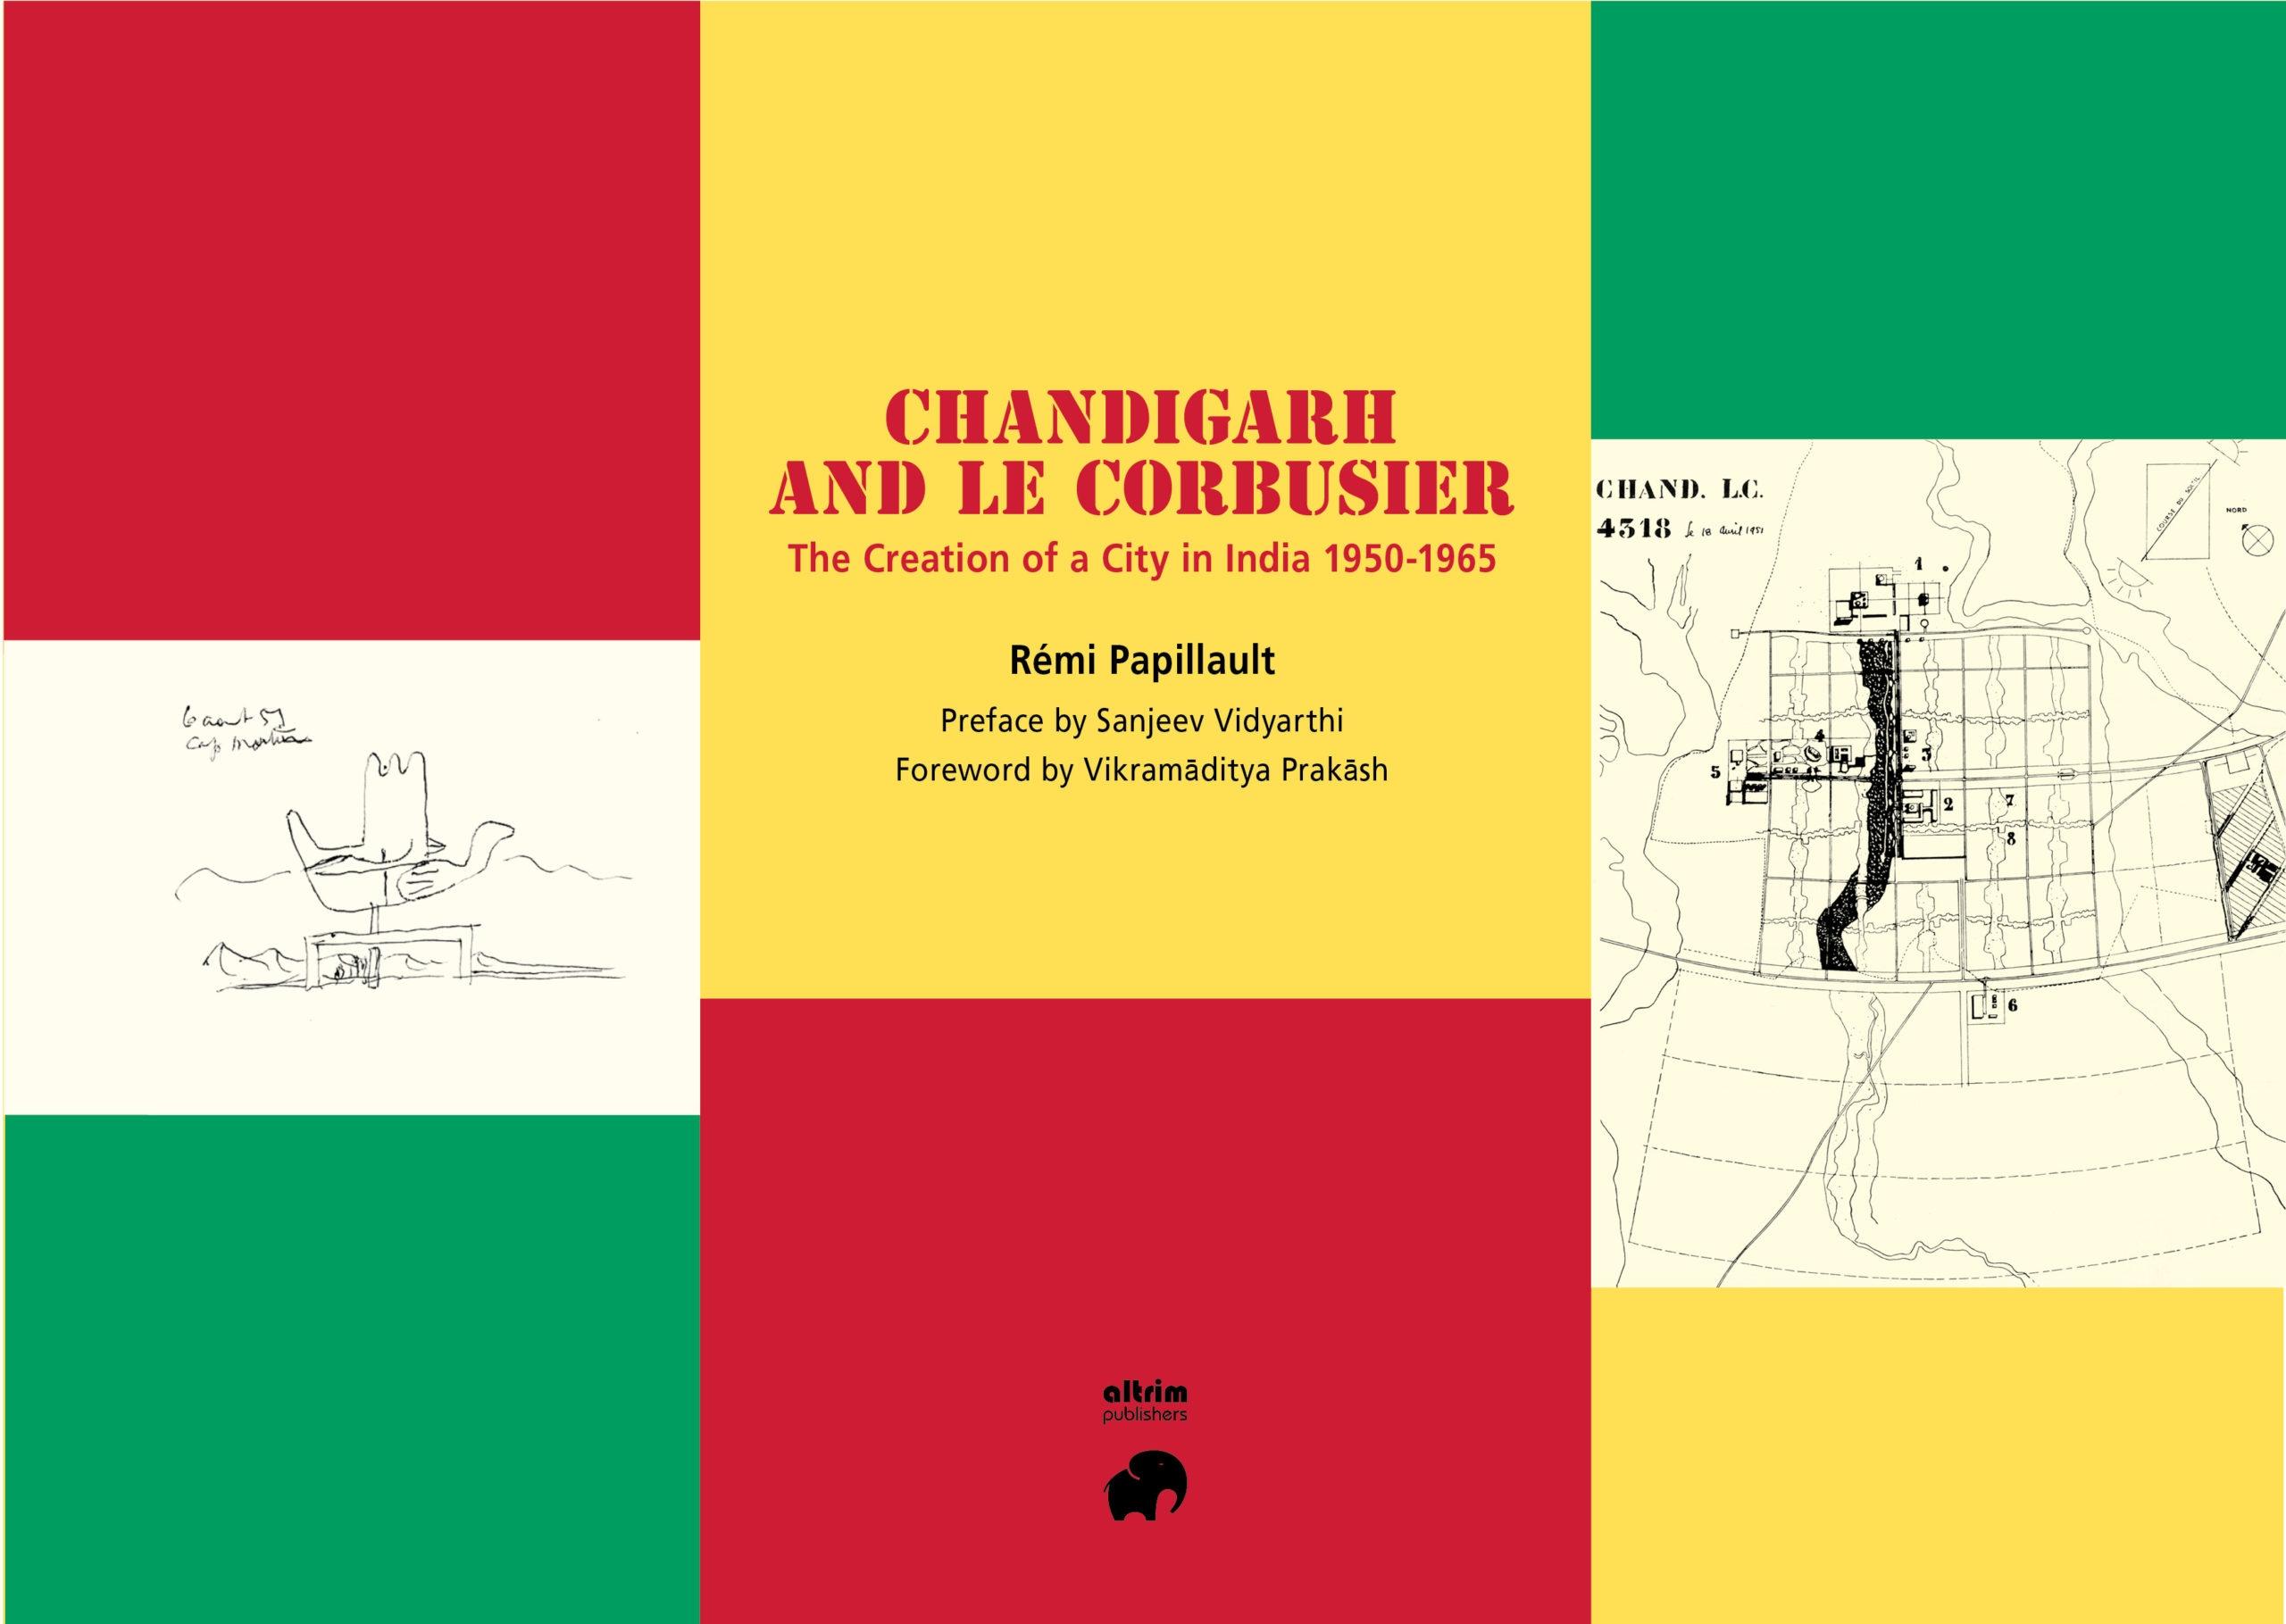 CHANDIGARH AND LE CORBUSIER "THE CREATION OF A CITY IN INDIA 1950-1965"